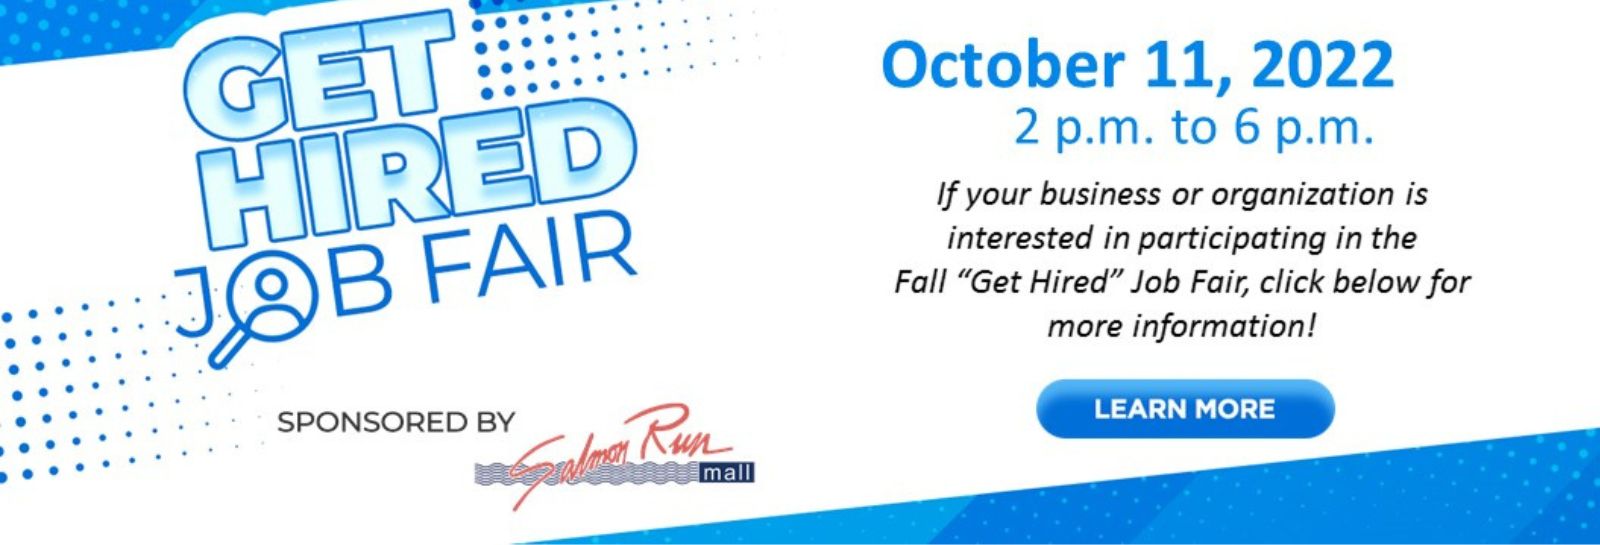 Get Hired Job Fair at Salmon Run Mall October 11th from 2pm to 6pm